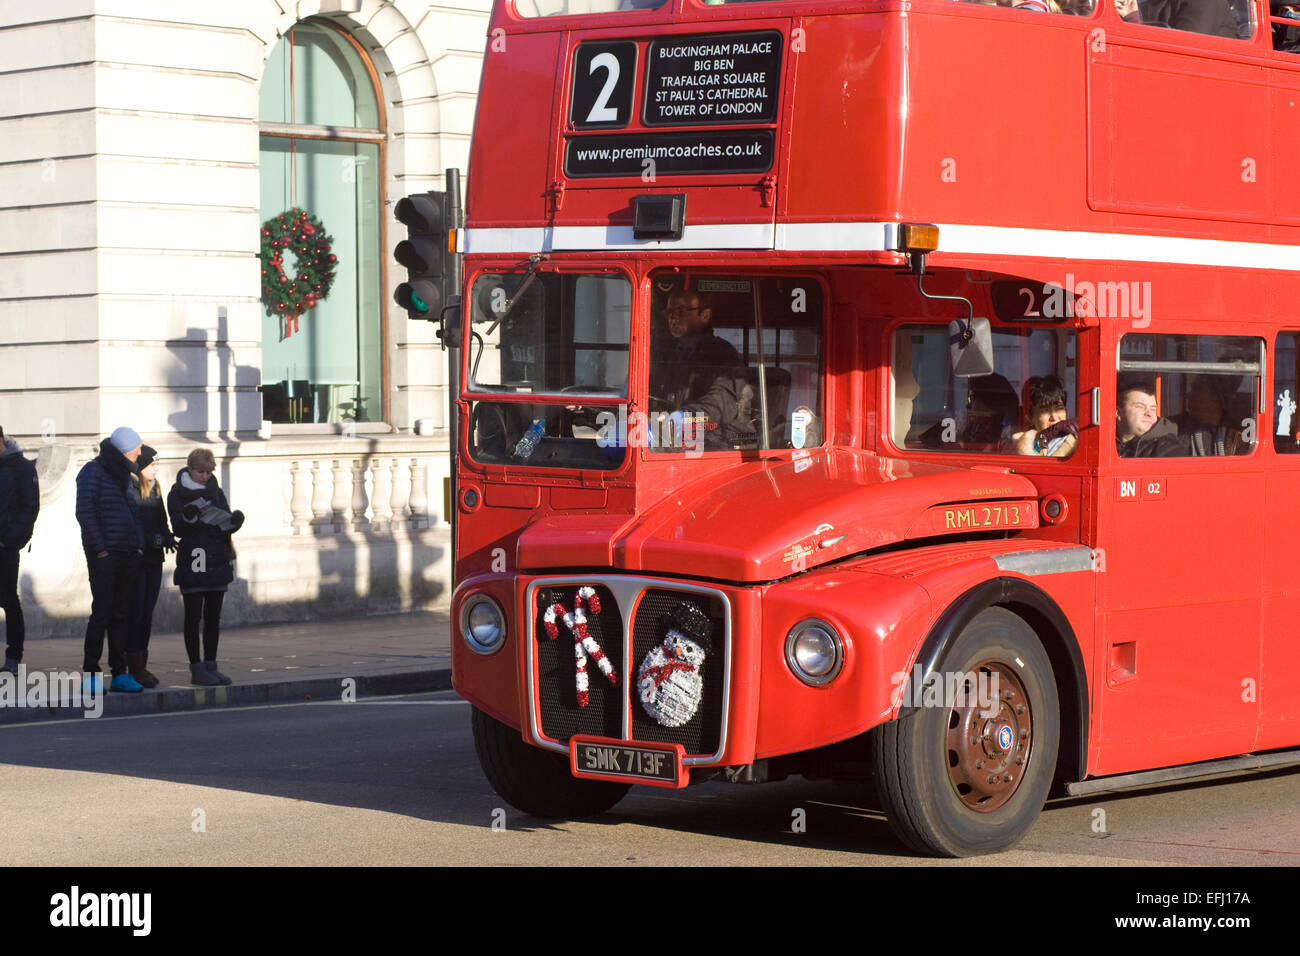 London Double decker bus with snowman and candy cane Christmas decorations on the front Stock Photo